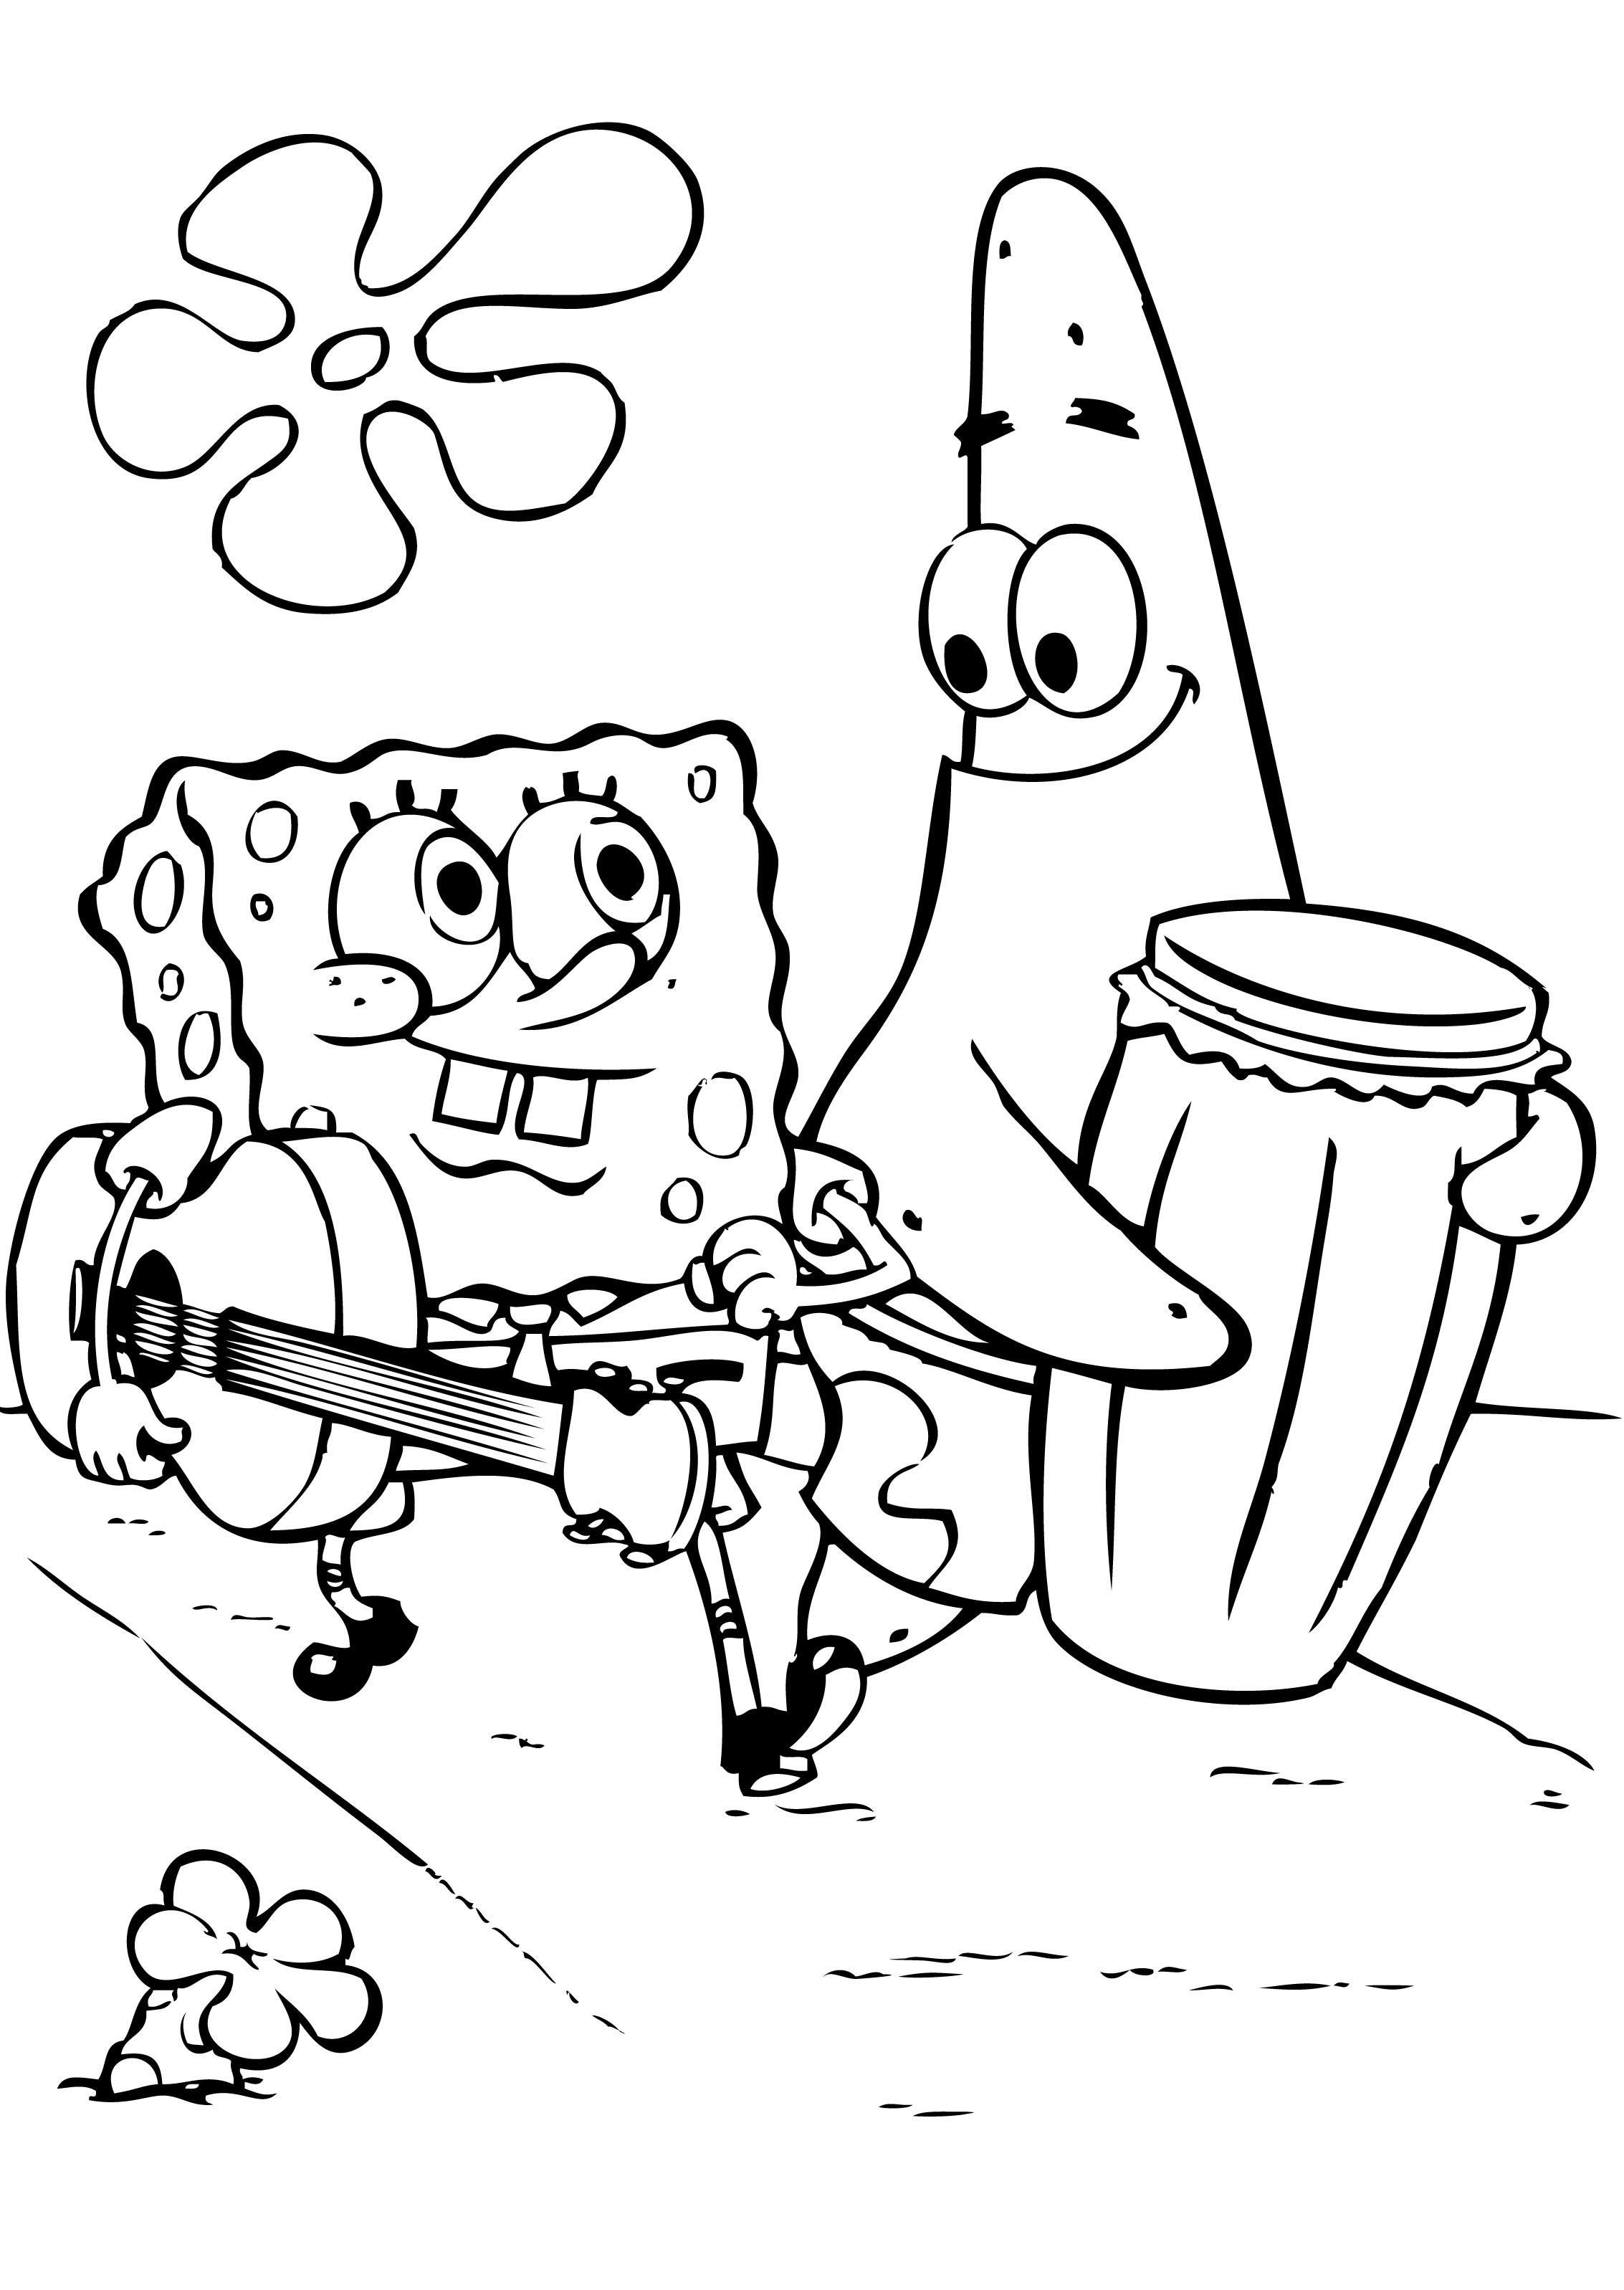 spongebob and patrick coloring pages | Coloring Pages for Kids